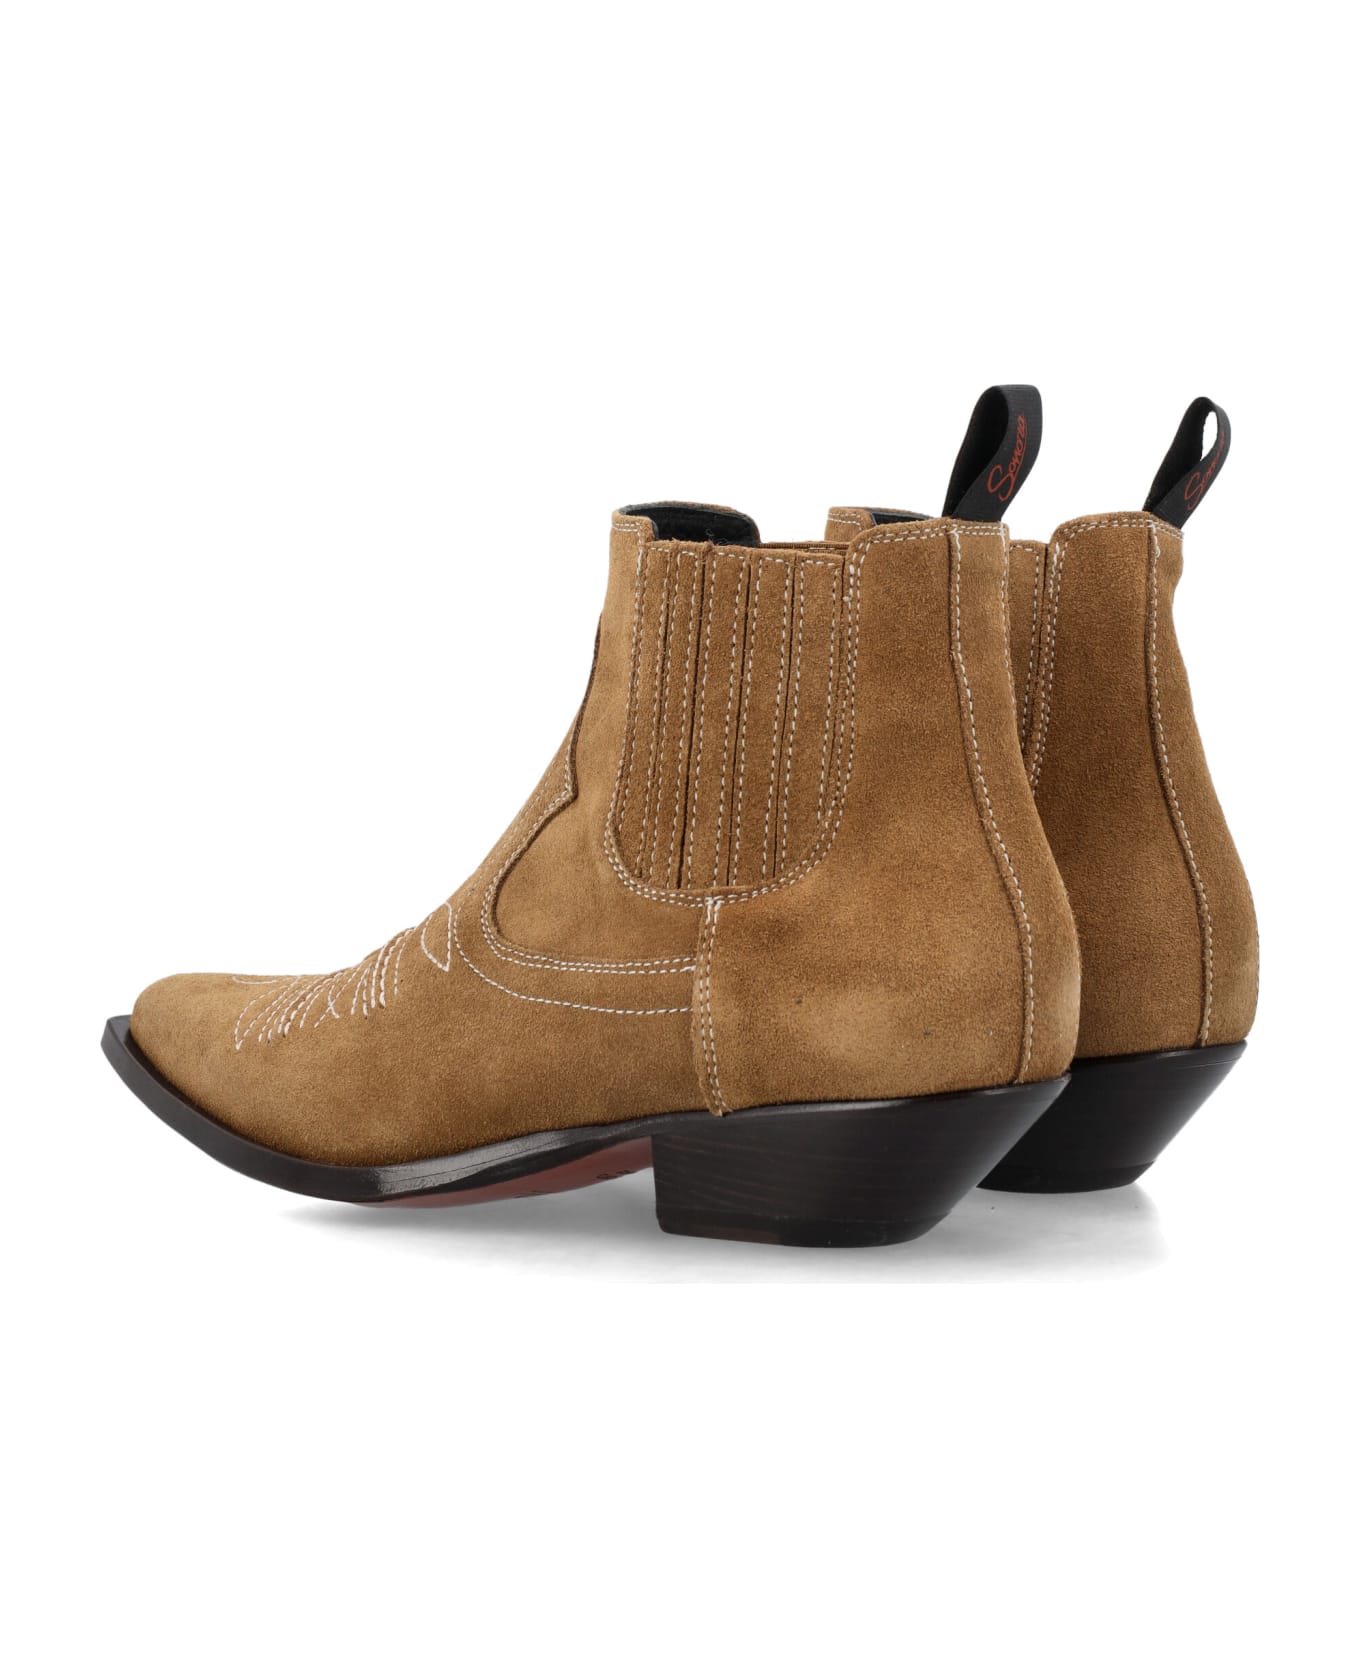 Sonora Idalgo Flower Ankle Boots - CIGAR